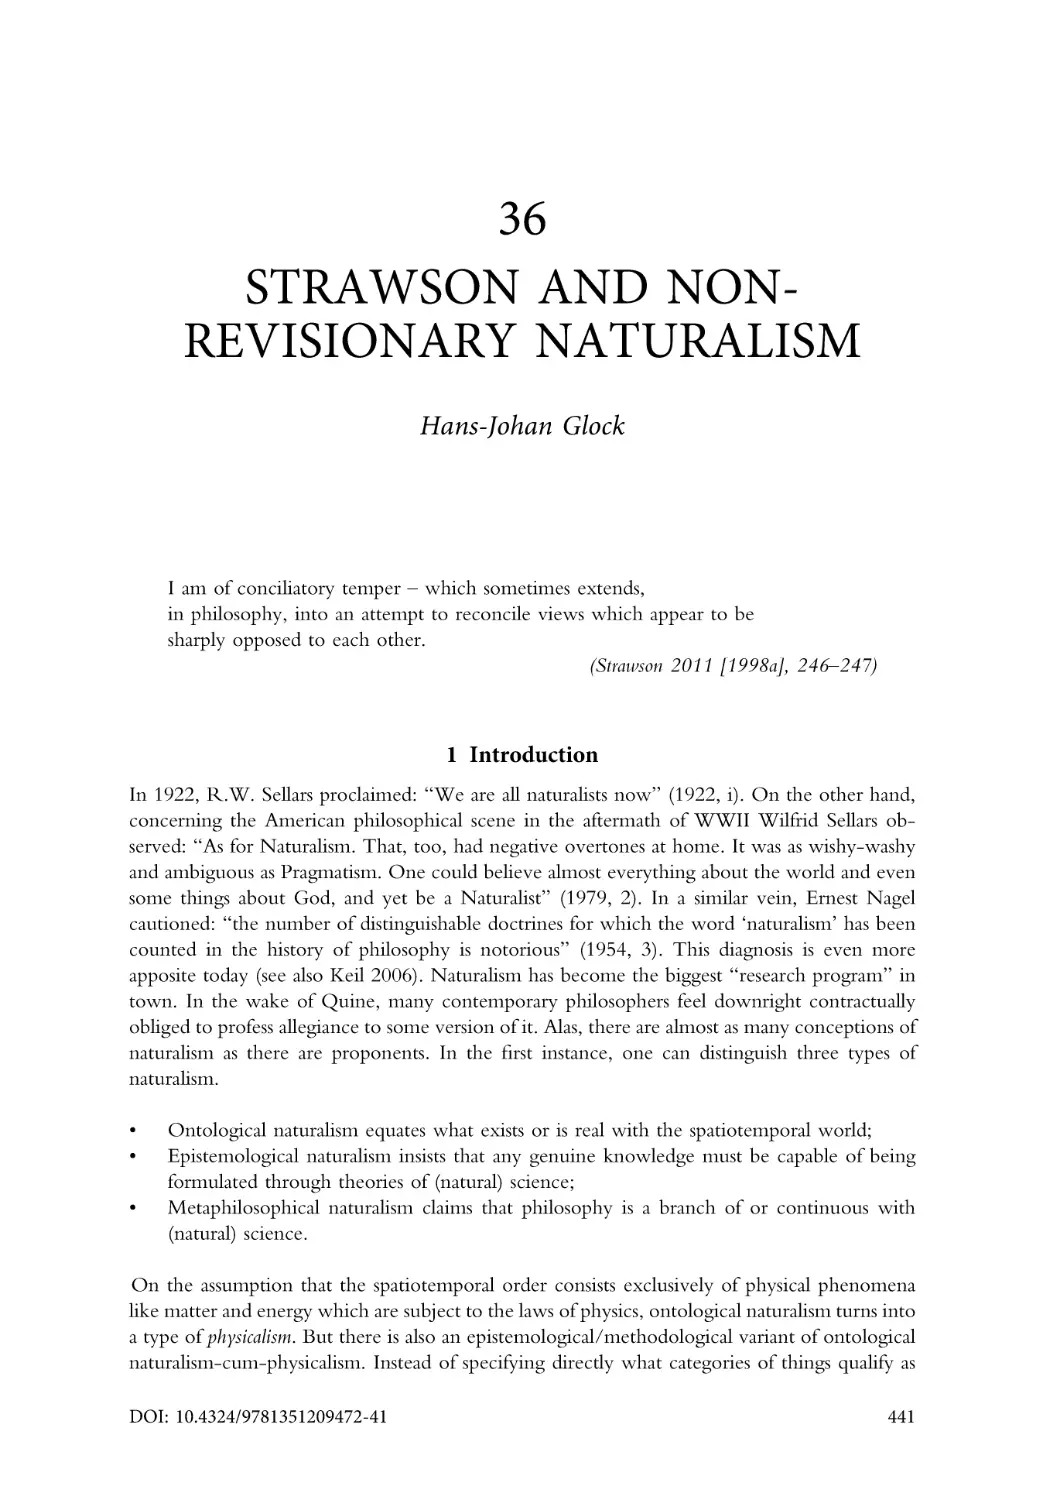 36. Strawson and non-revisionary naturalism
1. Introduction